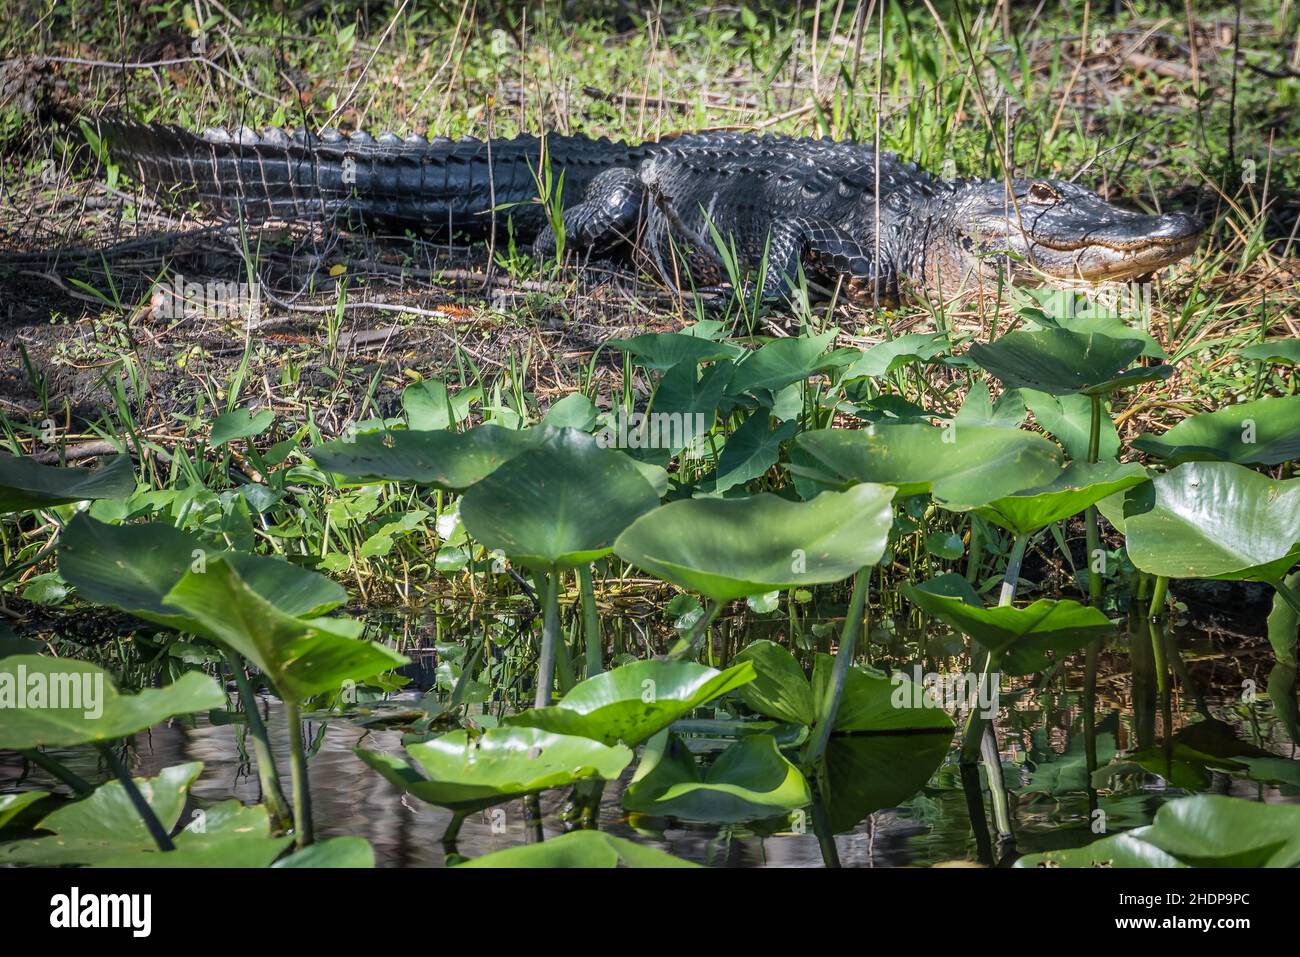 American alligator (Alligator mississippiensis) along the shoreline of the St. Johns River near Blue Spring State Park in Orange City, Florida. (USA) Stock Photo